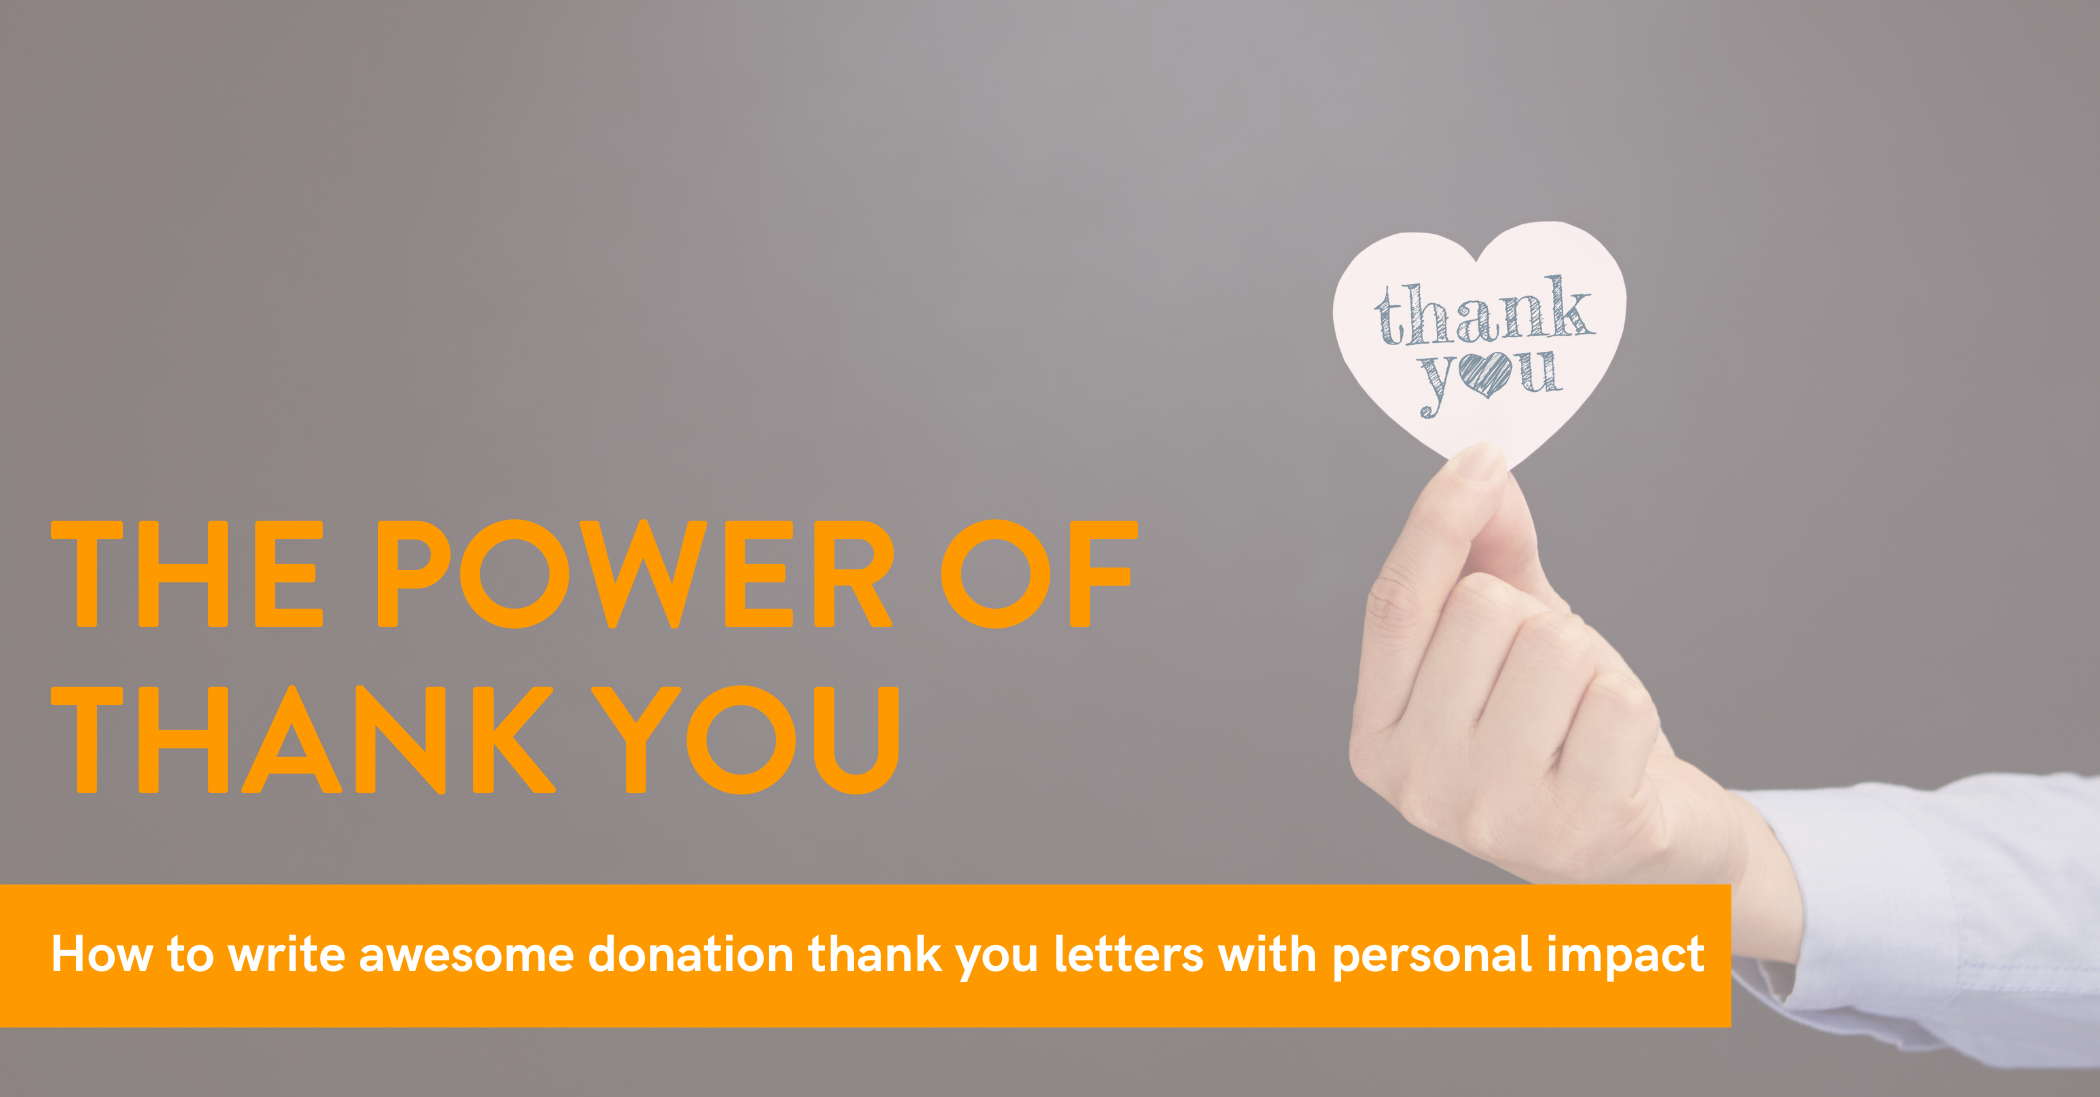 How to Write Awesome Donation Thank You Letters